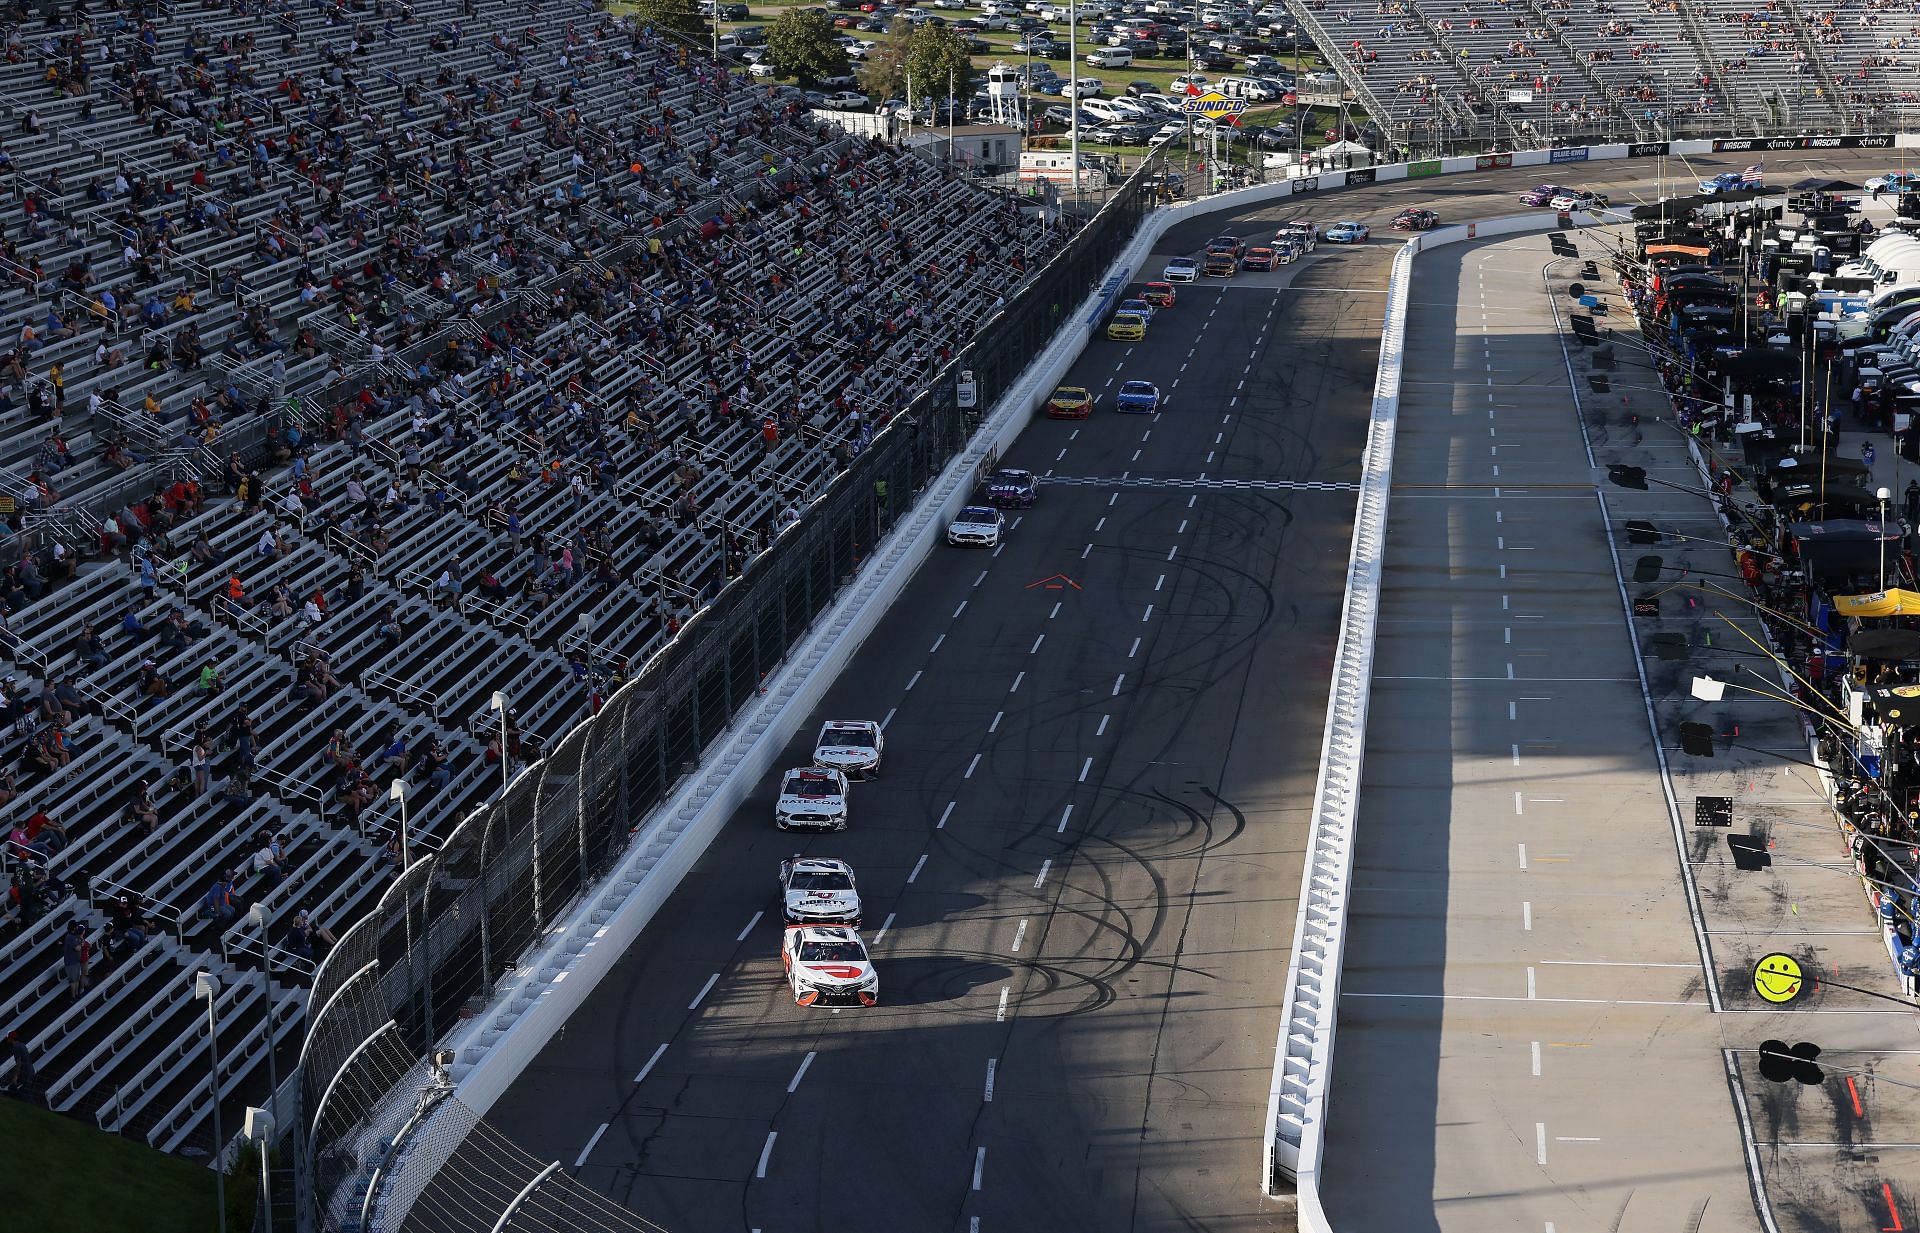 A general view of the NASCAR Cup Series Blue-Emu Maximum Pain Relief 500 at Martinsville Speedway (Photo by James Gilbert/Getty Images)